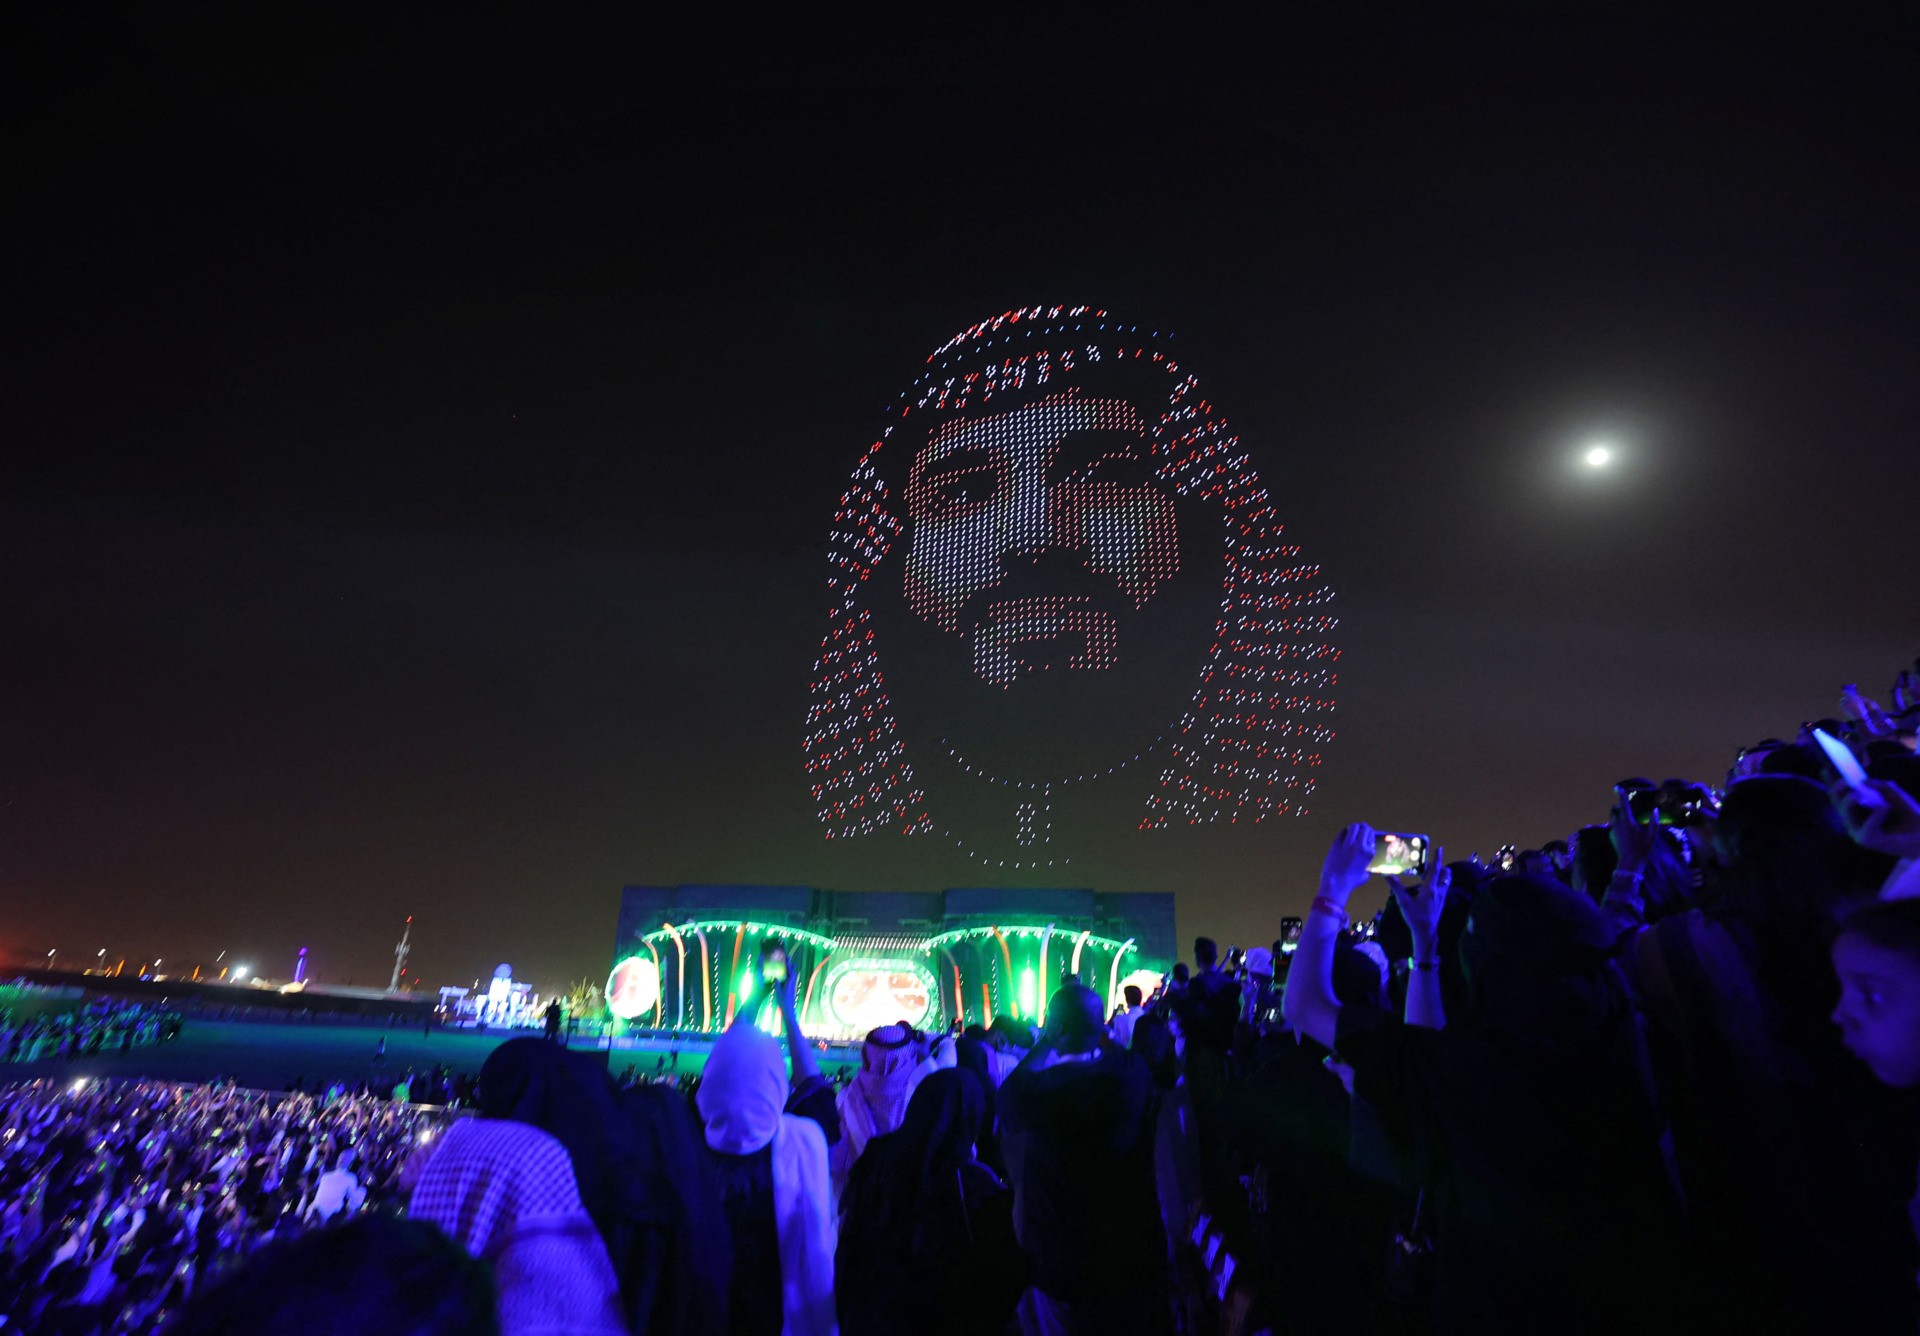 An image of Saudi crown prince Mohammed bin Salman is displayed on the opening night of the Riyadh Season festivities in the Saudi capital late on October 20, 2021. - The arts and culture festival began yesterday and runs until March 2022 in Riyadh. (Photo by Fayez Nureldine / AFP) (Photo by FAYEZ NURELDINE/AFP via Getty Images)